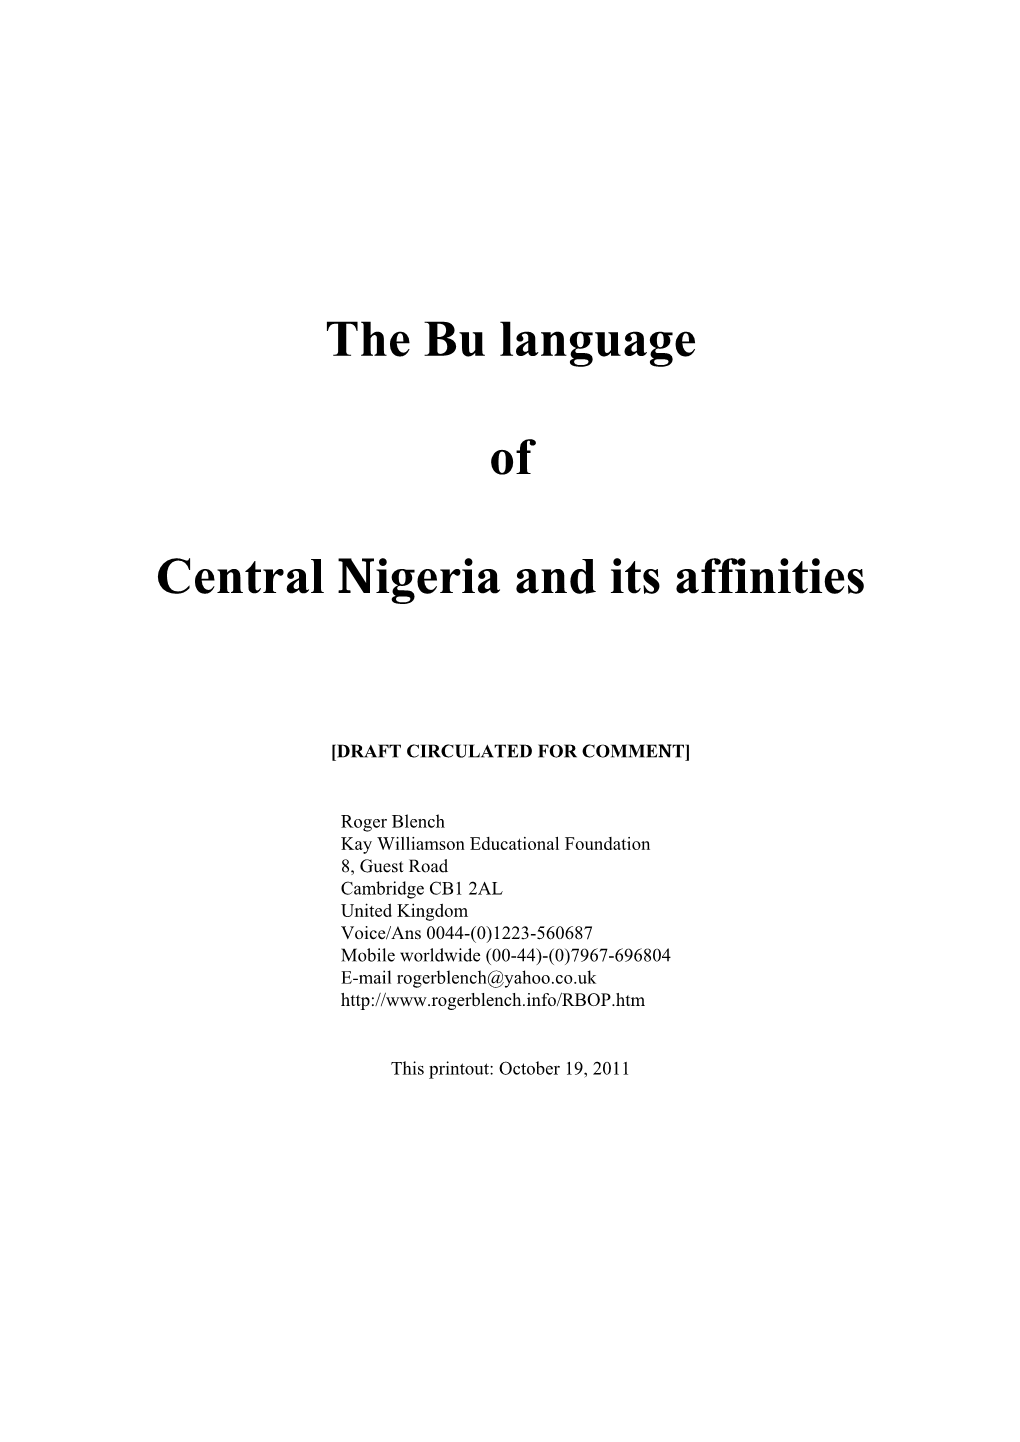 The Bu Language of Central Nigeria and Its Affinities